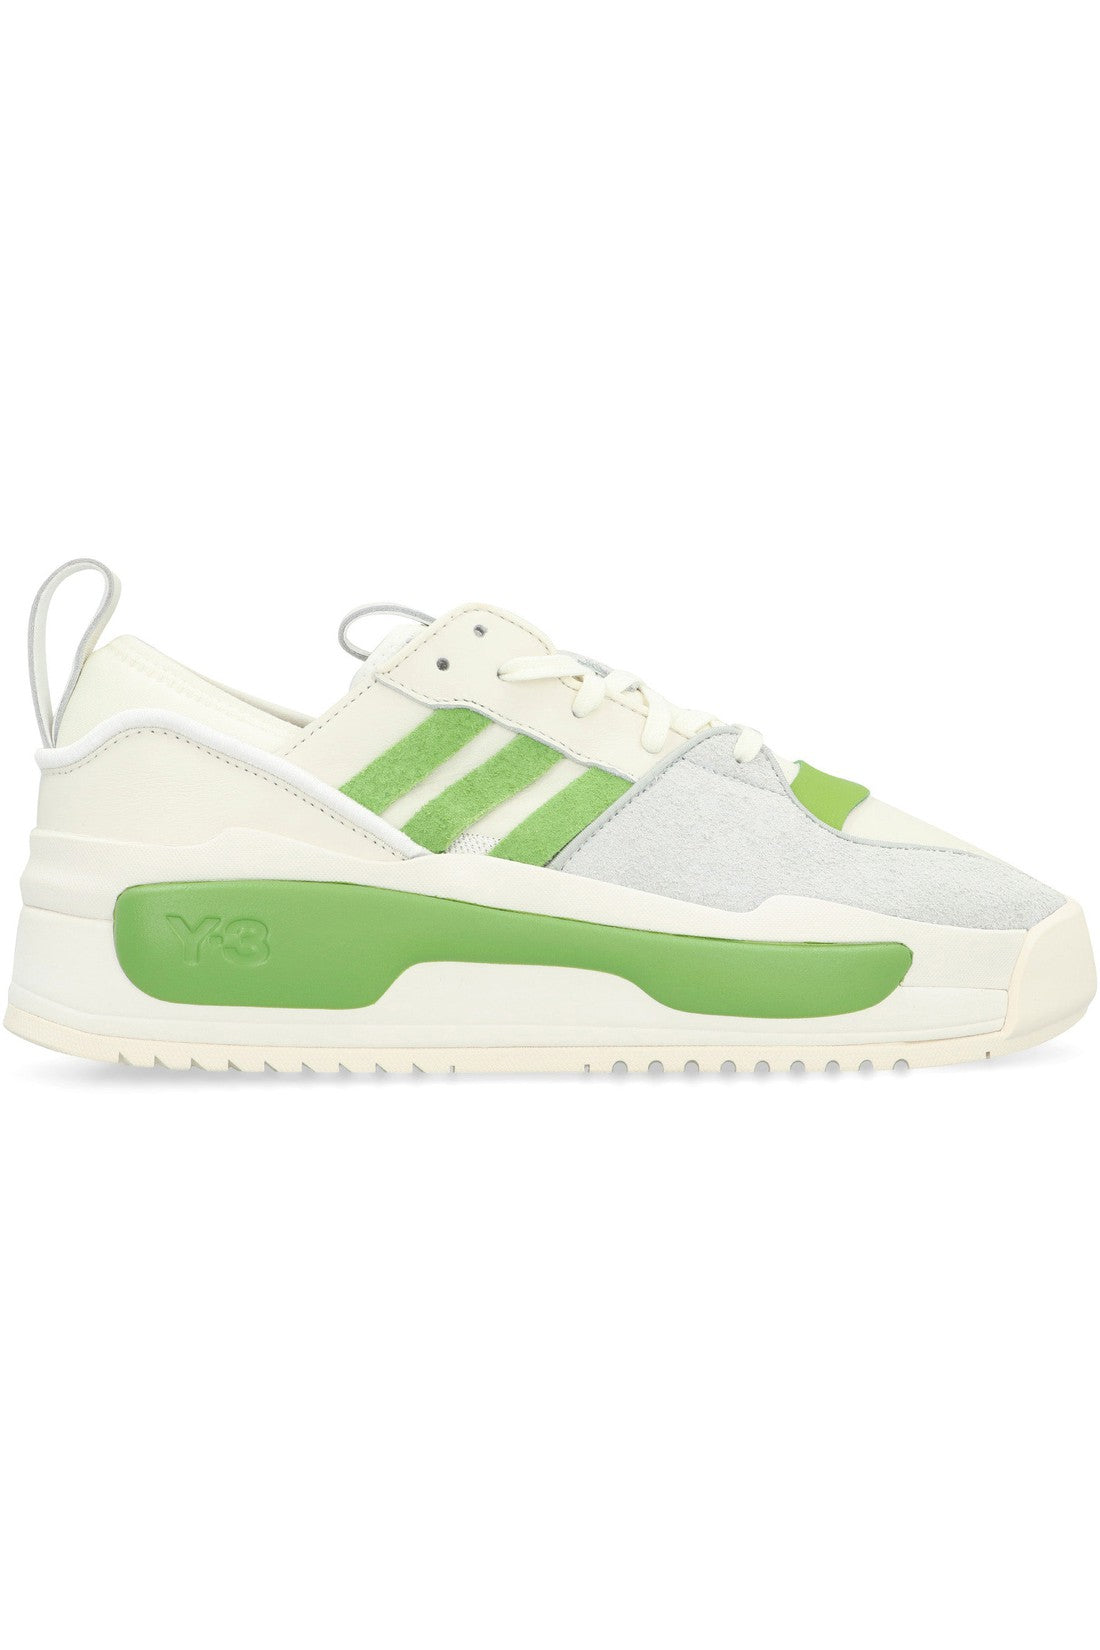 adidas Y-3-OUTLET-SALE-Rivalry low-top sneakers-ARCHIVIST